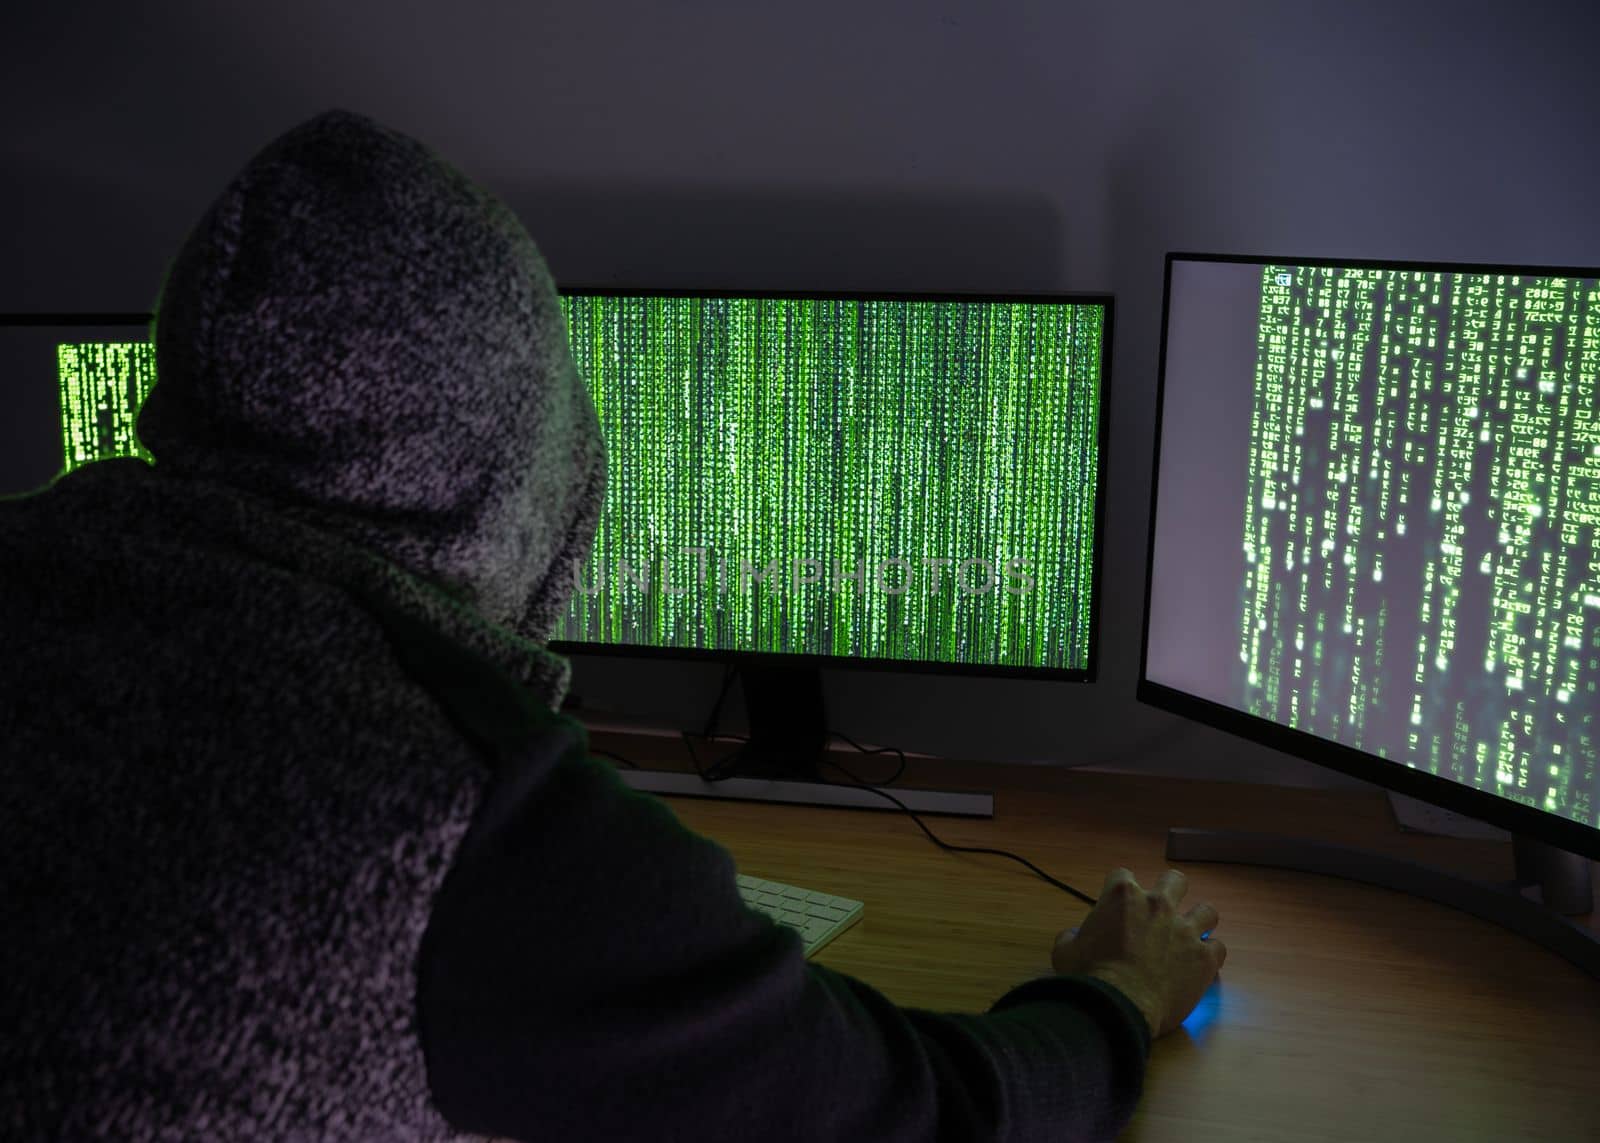 Anonymous Hacker male with hood using his skills to break security systems in internet.